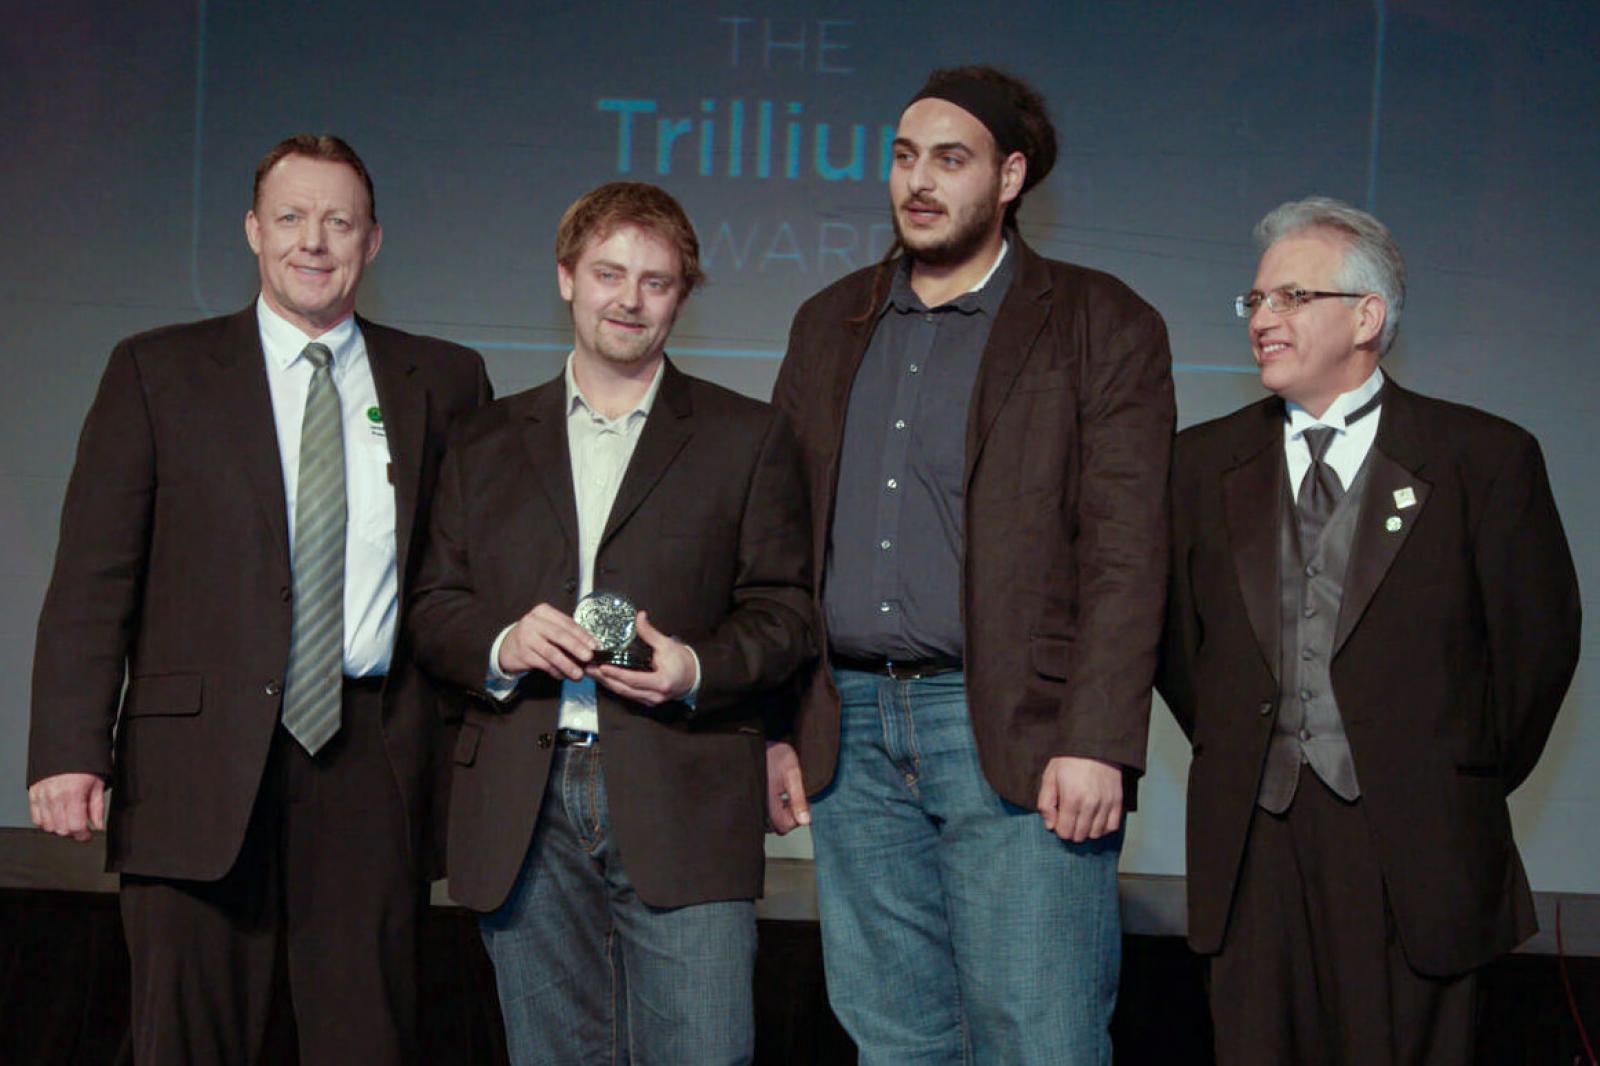 Bienenstock Natural Playgrounds was honoured with the Trillium Award. On hand during the special presentation at Congress 2010 are from left, Paul Ronan, Ontario Parks Association executive director, Bienenstock representatives, Jeff Cowan, vice president of operations, and John El-Raheb, manager of online data, with Tony DiGiovanni, LO executive director.